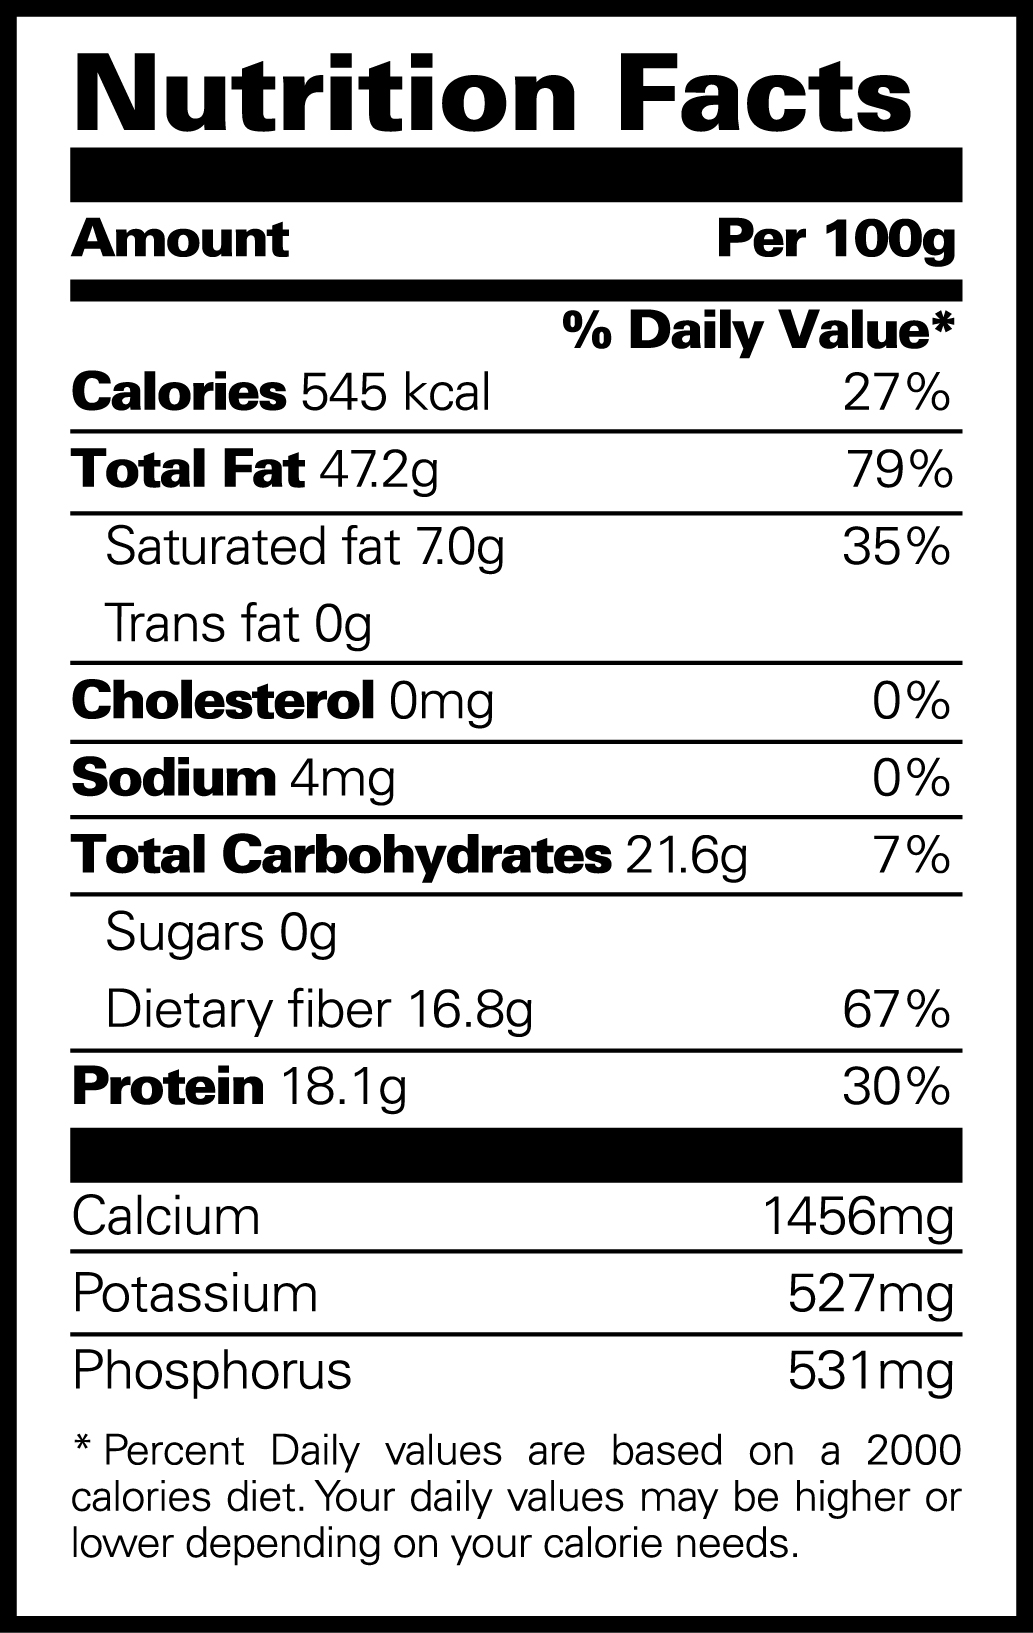 Per value. Nutrition facts. Almond Nutrition facts. Nutrition facts Calories. Amount Nutrition facts.